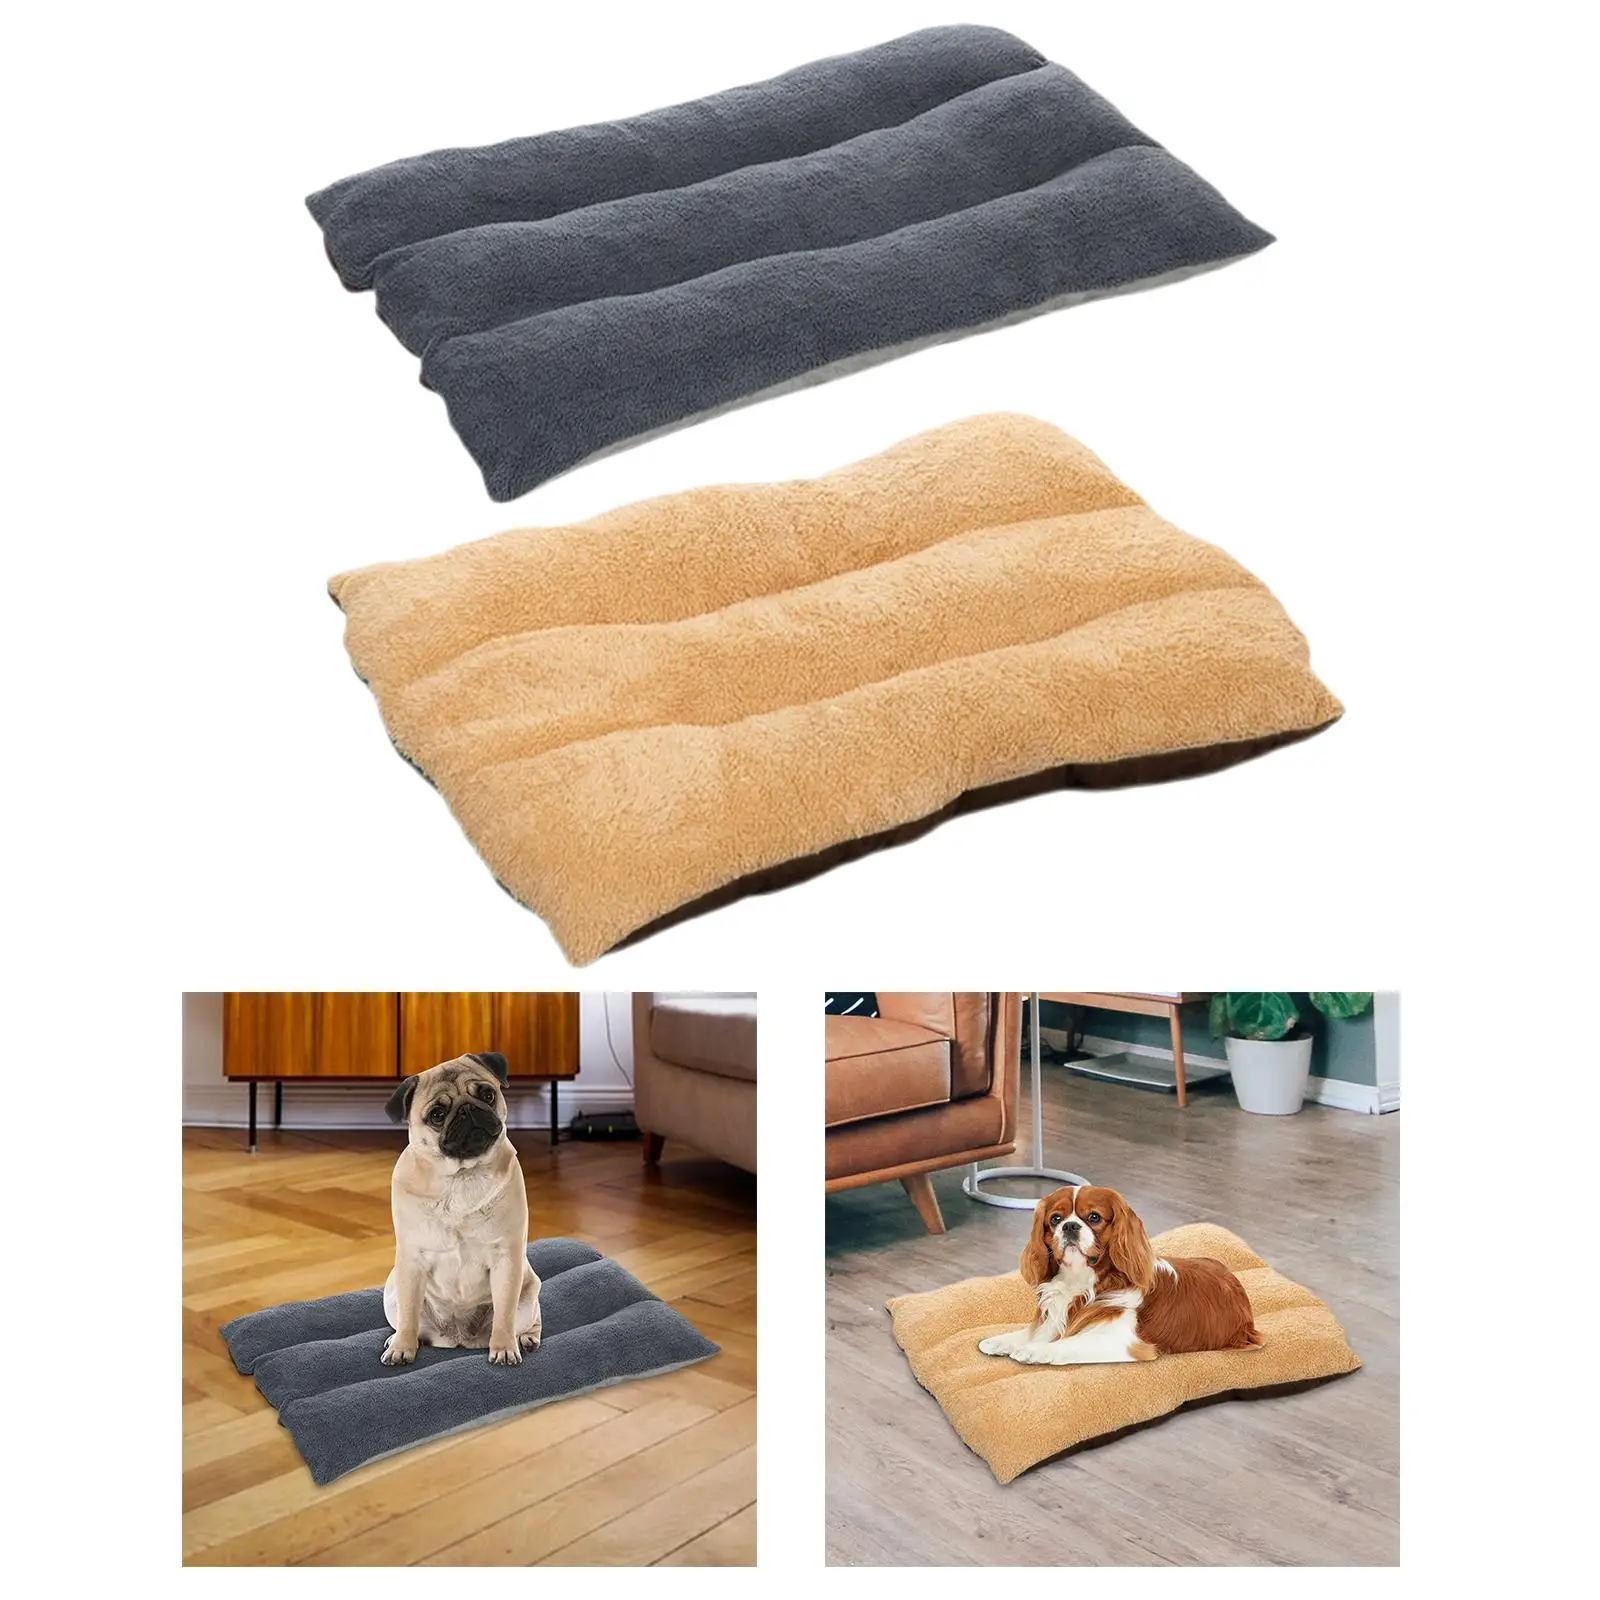 Pet Mat Pillow Waterproof Square Machine Washable for Sleeping Large Cat